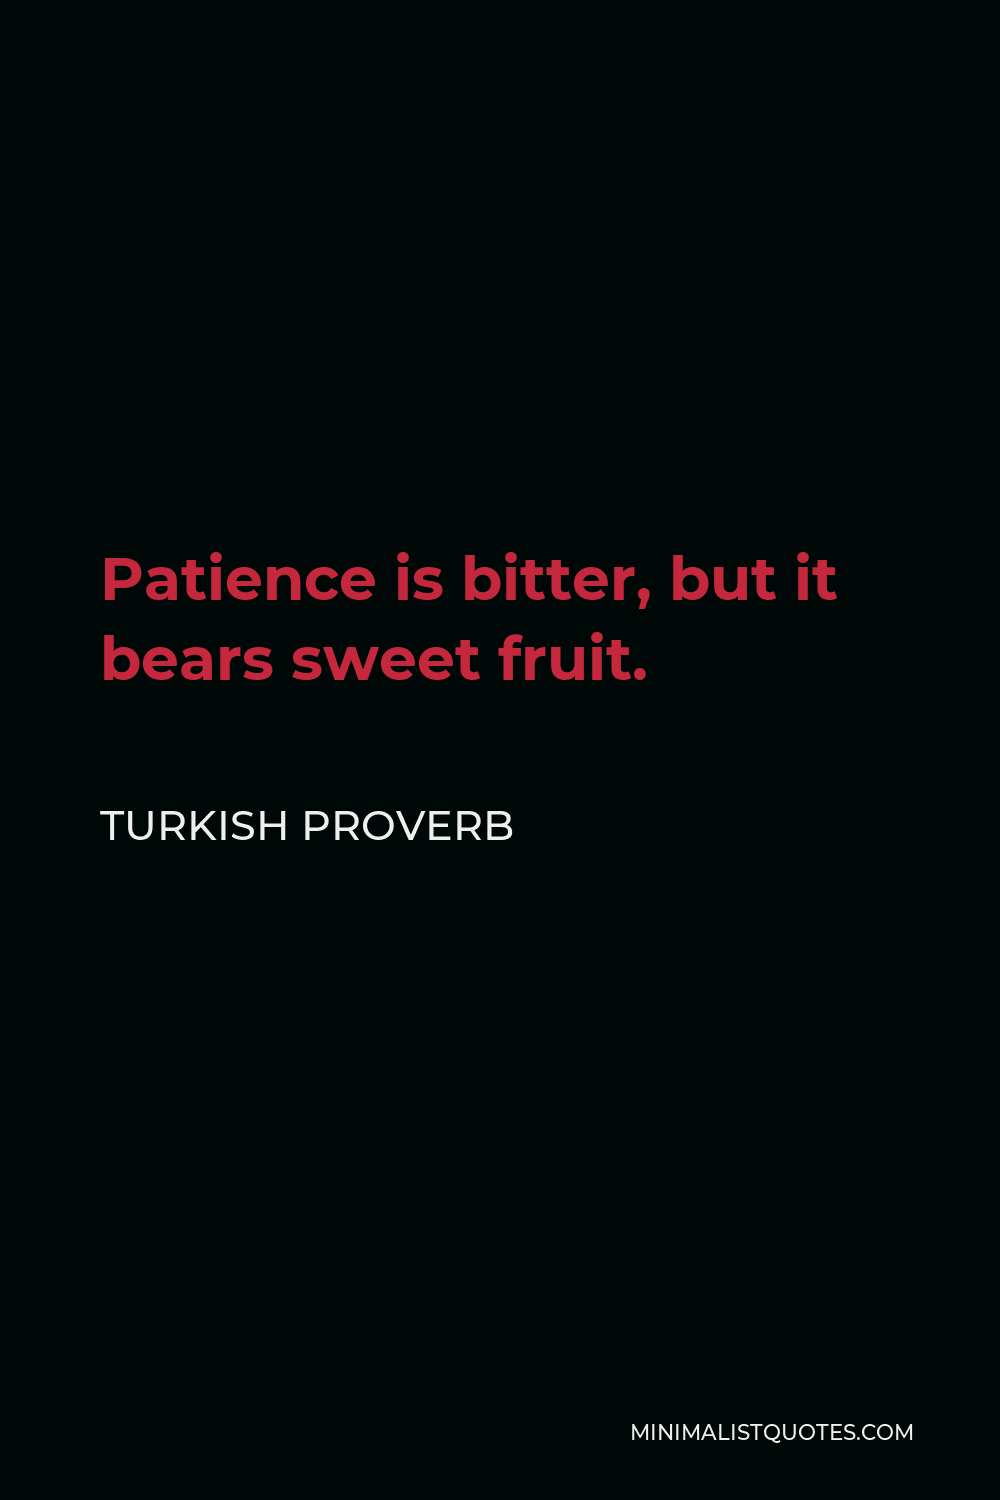 Turkish Proverb Quote - Patience is bitter, but it bears sweet fruit.